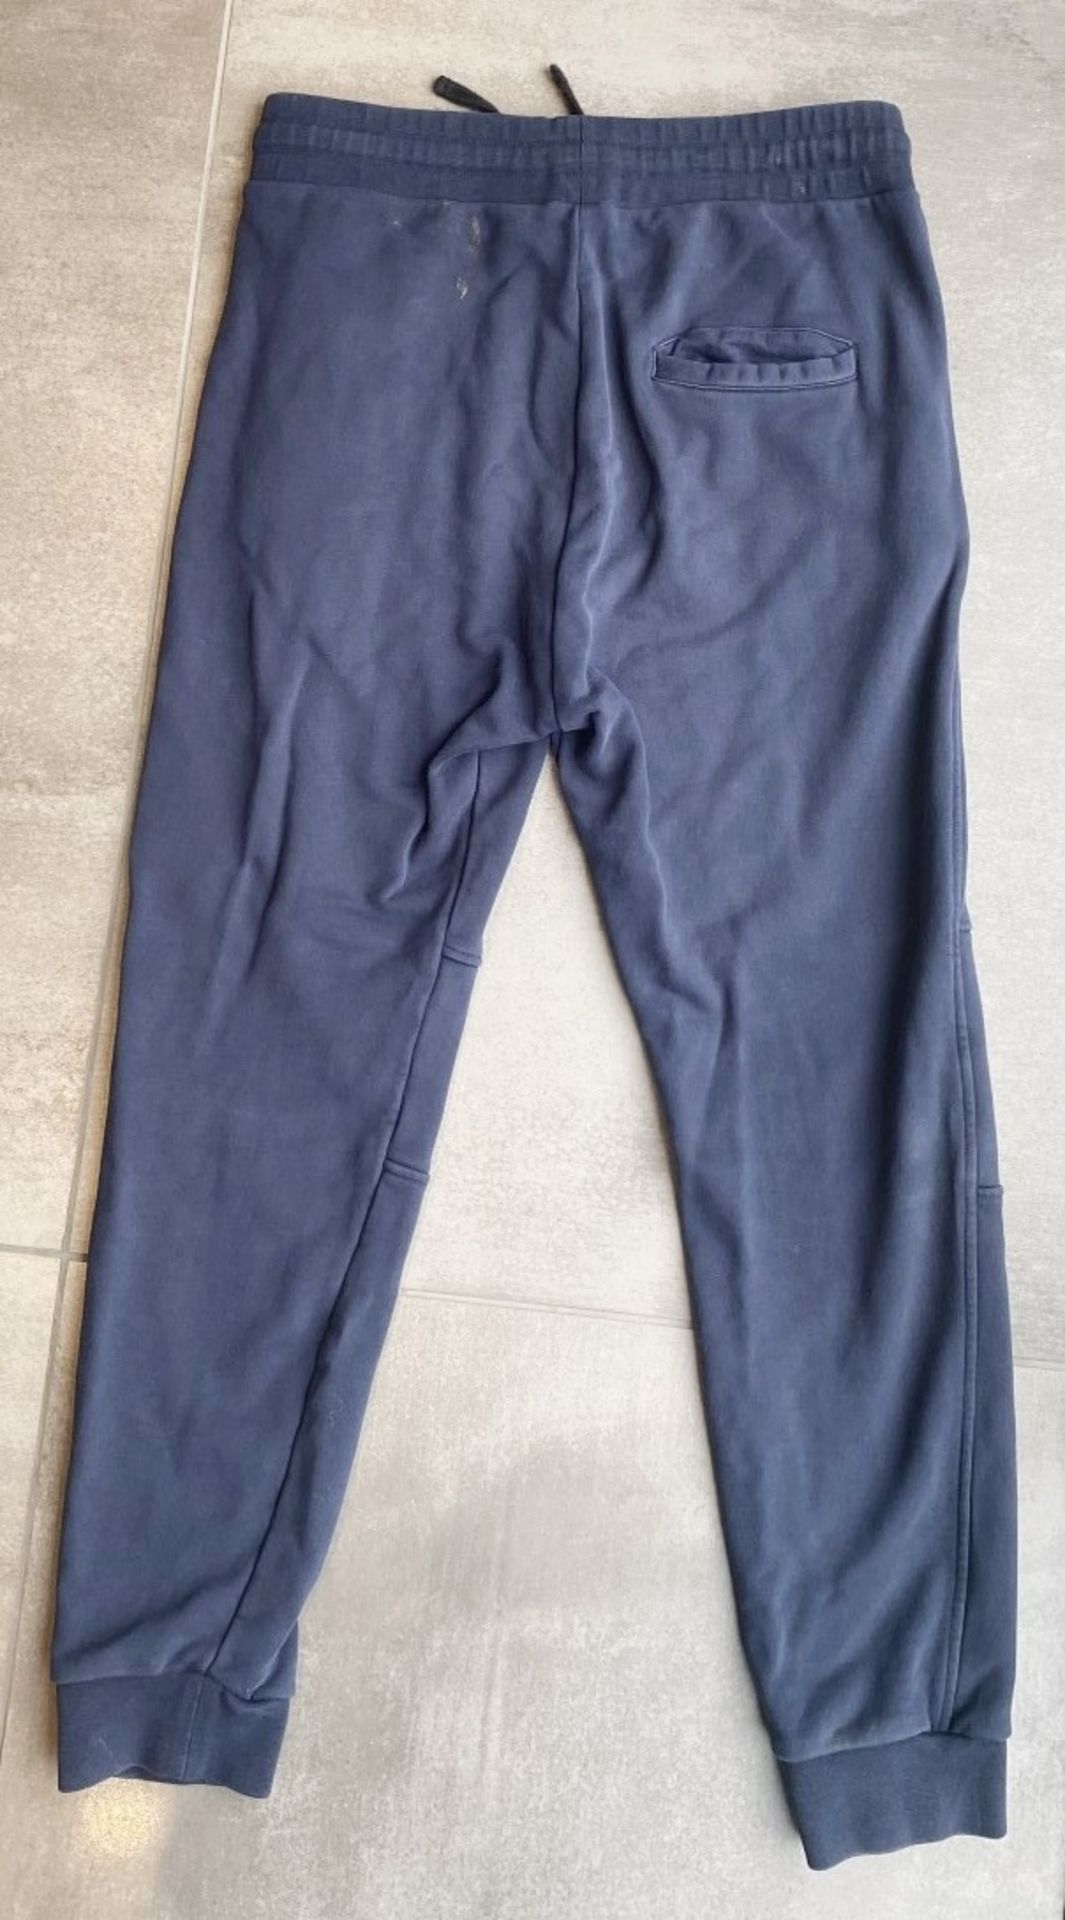 1 x Men's Genuine The Kooples Tracksuit In Navy - Size: Medium - Preowned In Worn - Image 11 of 12